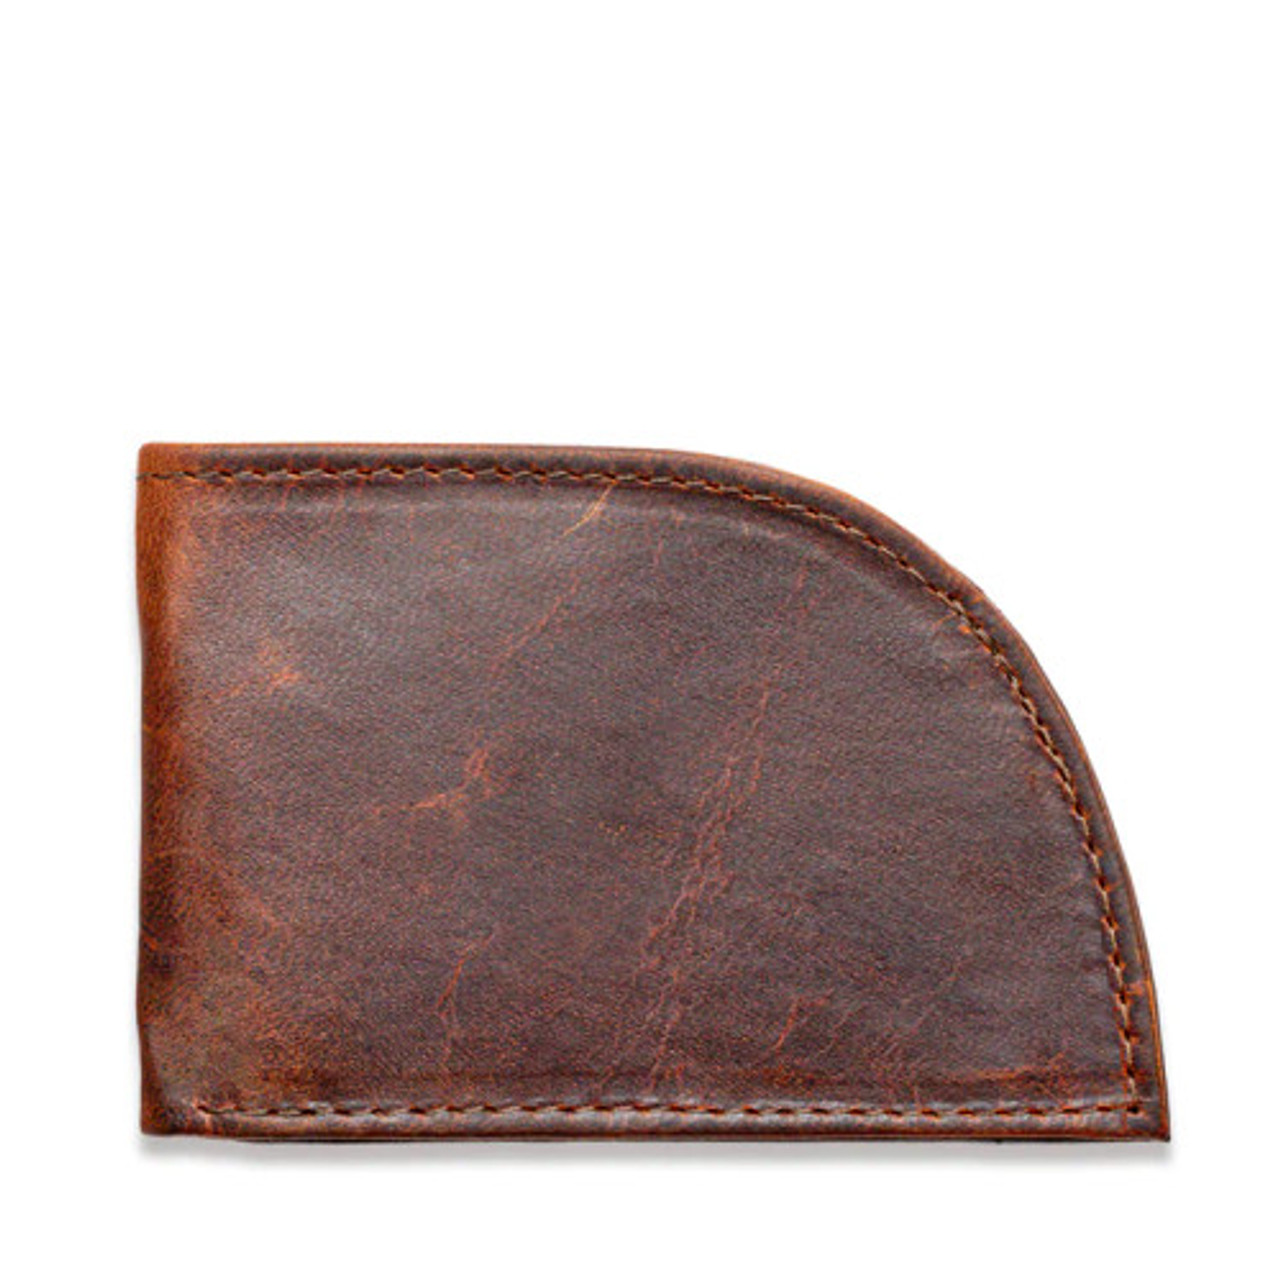 Moose Leather Front Pocket Wallet (brown) - The Old Farmer's Store